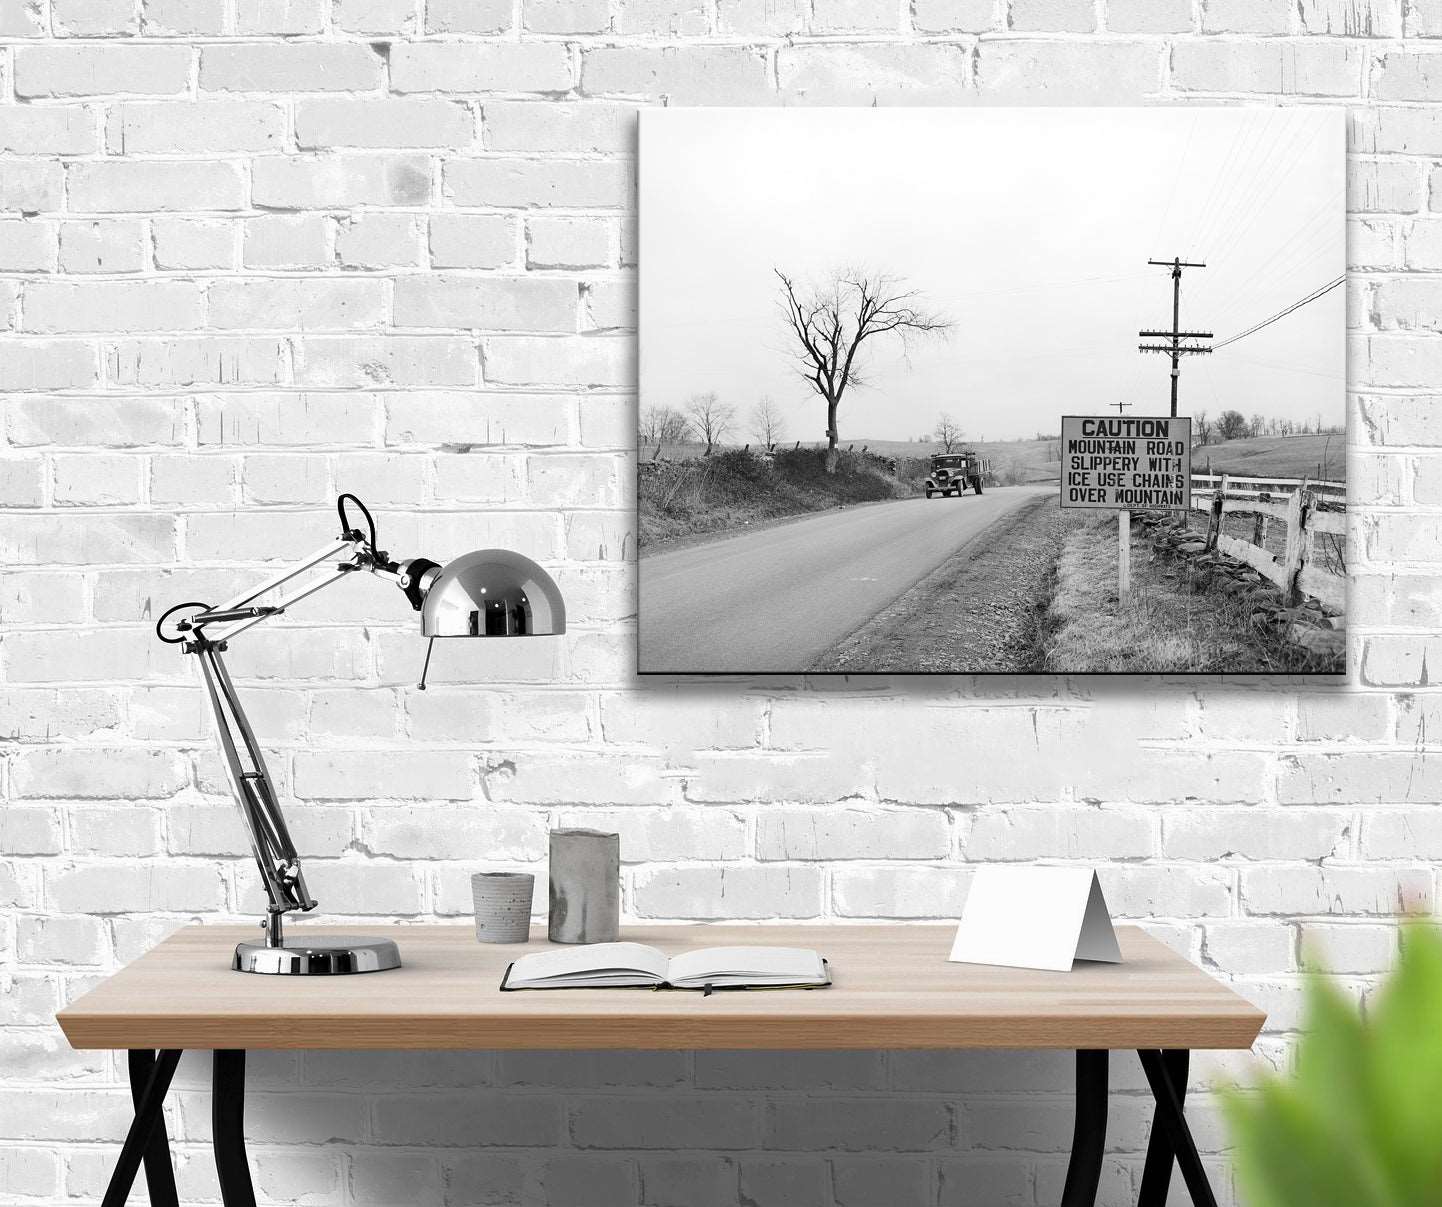 A photo of a canvas print hanging above a desk, featuring a vintage photograph of a car on the highway